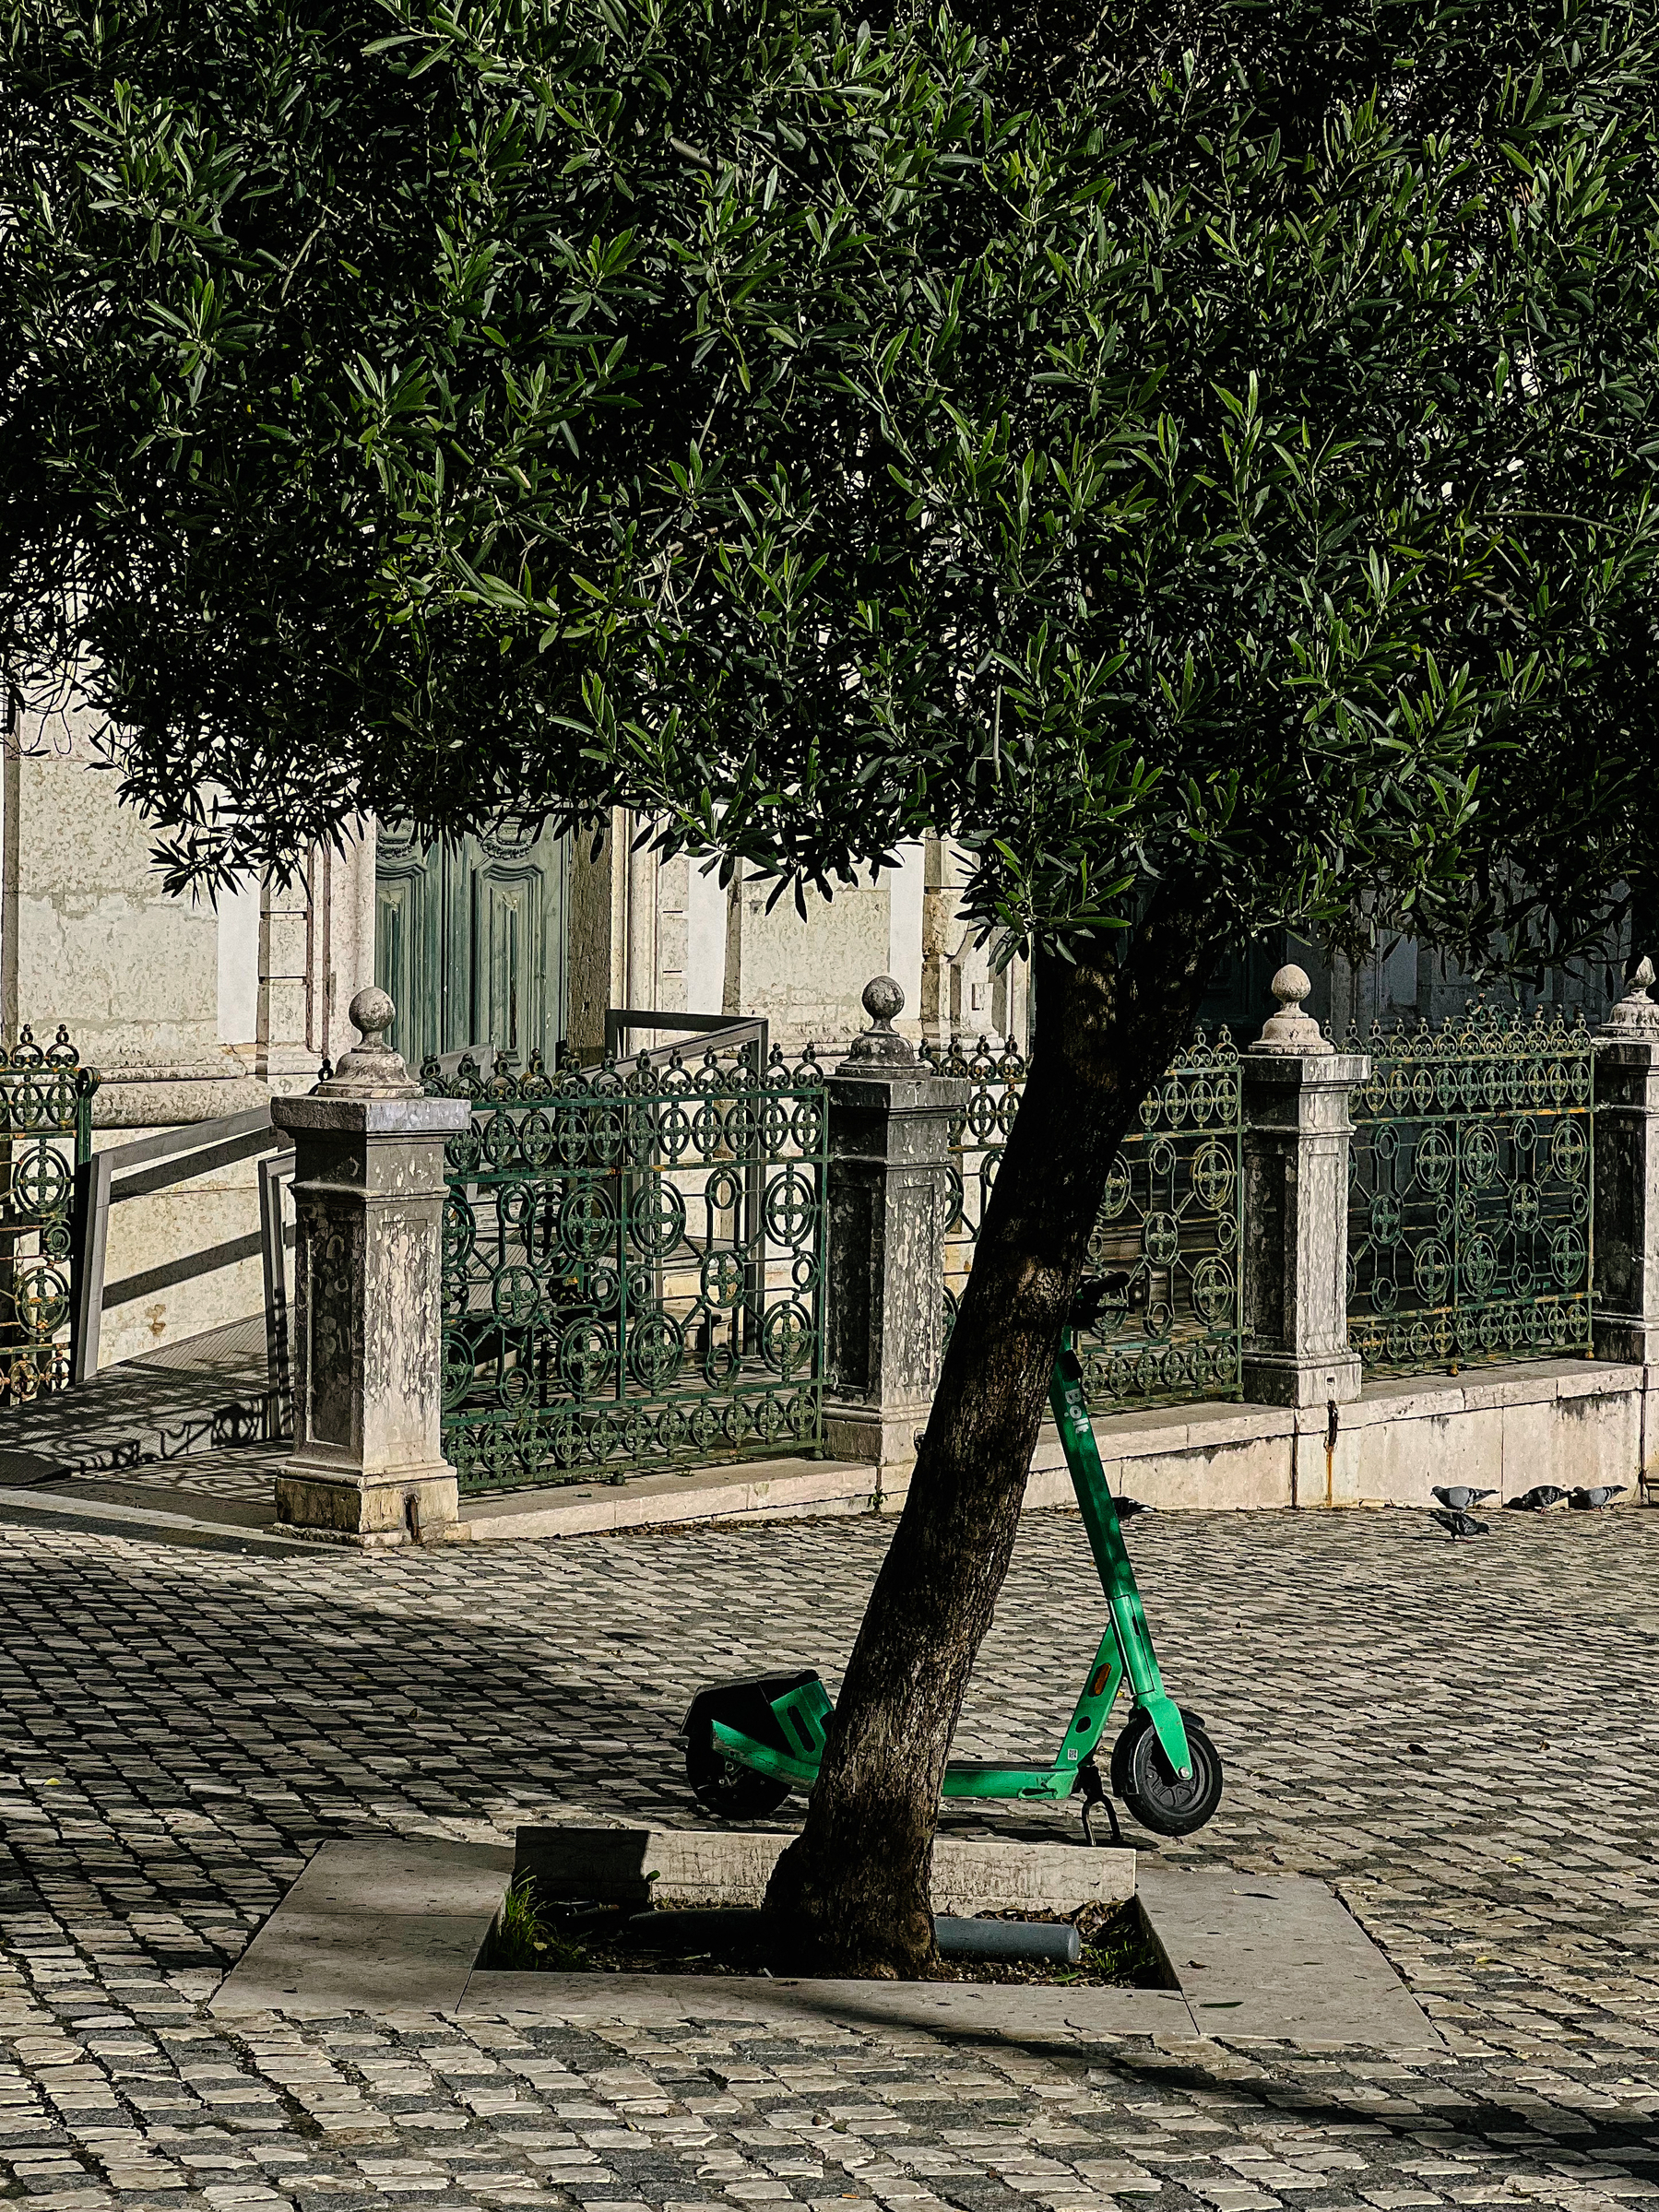 A scooter parked next to an olive tree, the entrance to a church visible in the background.